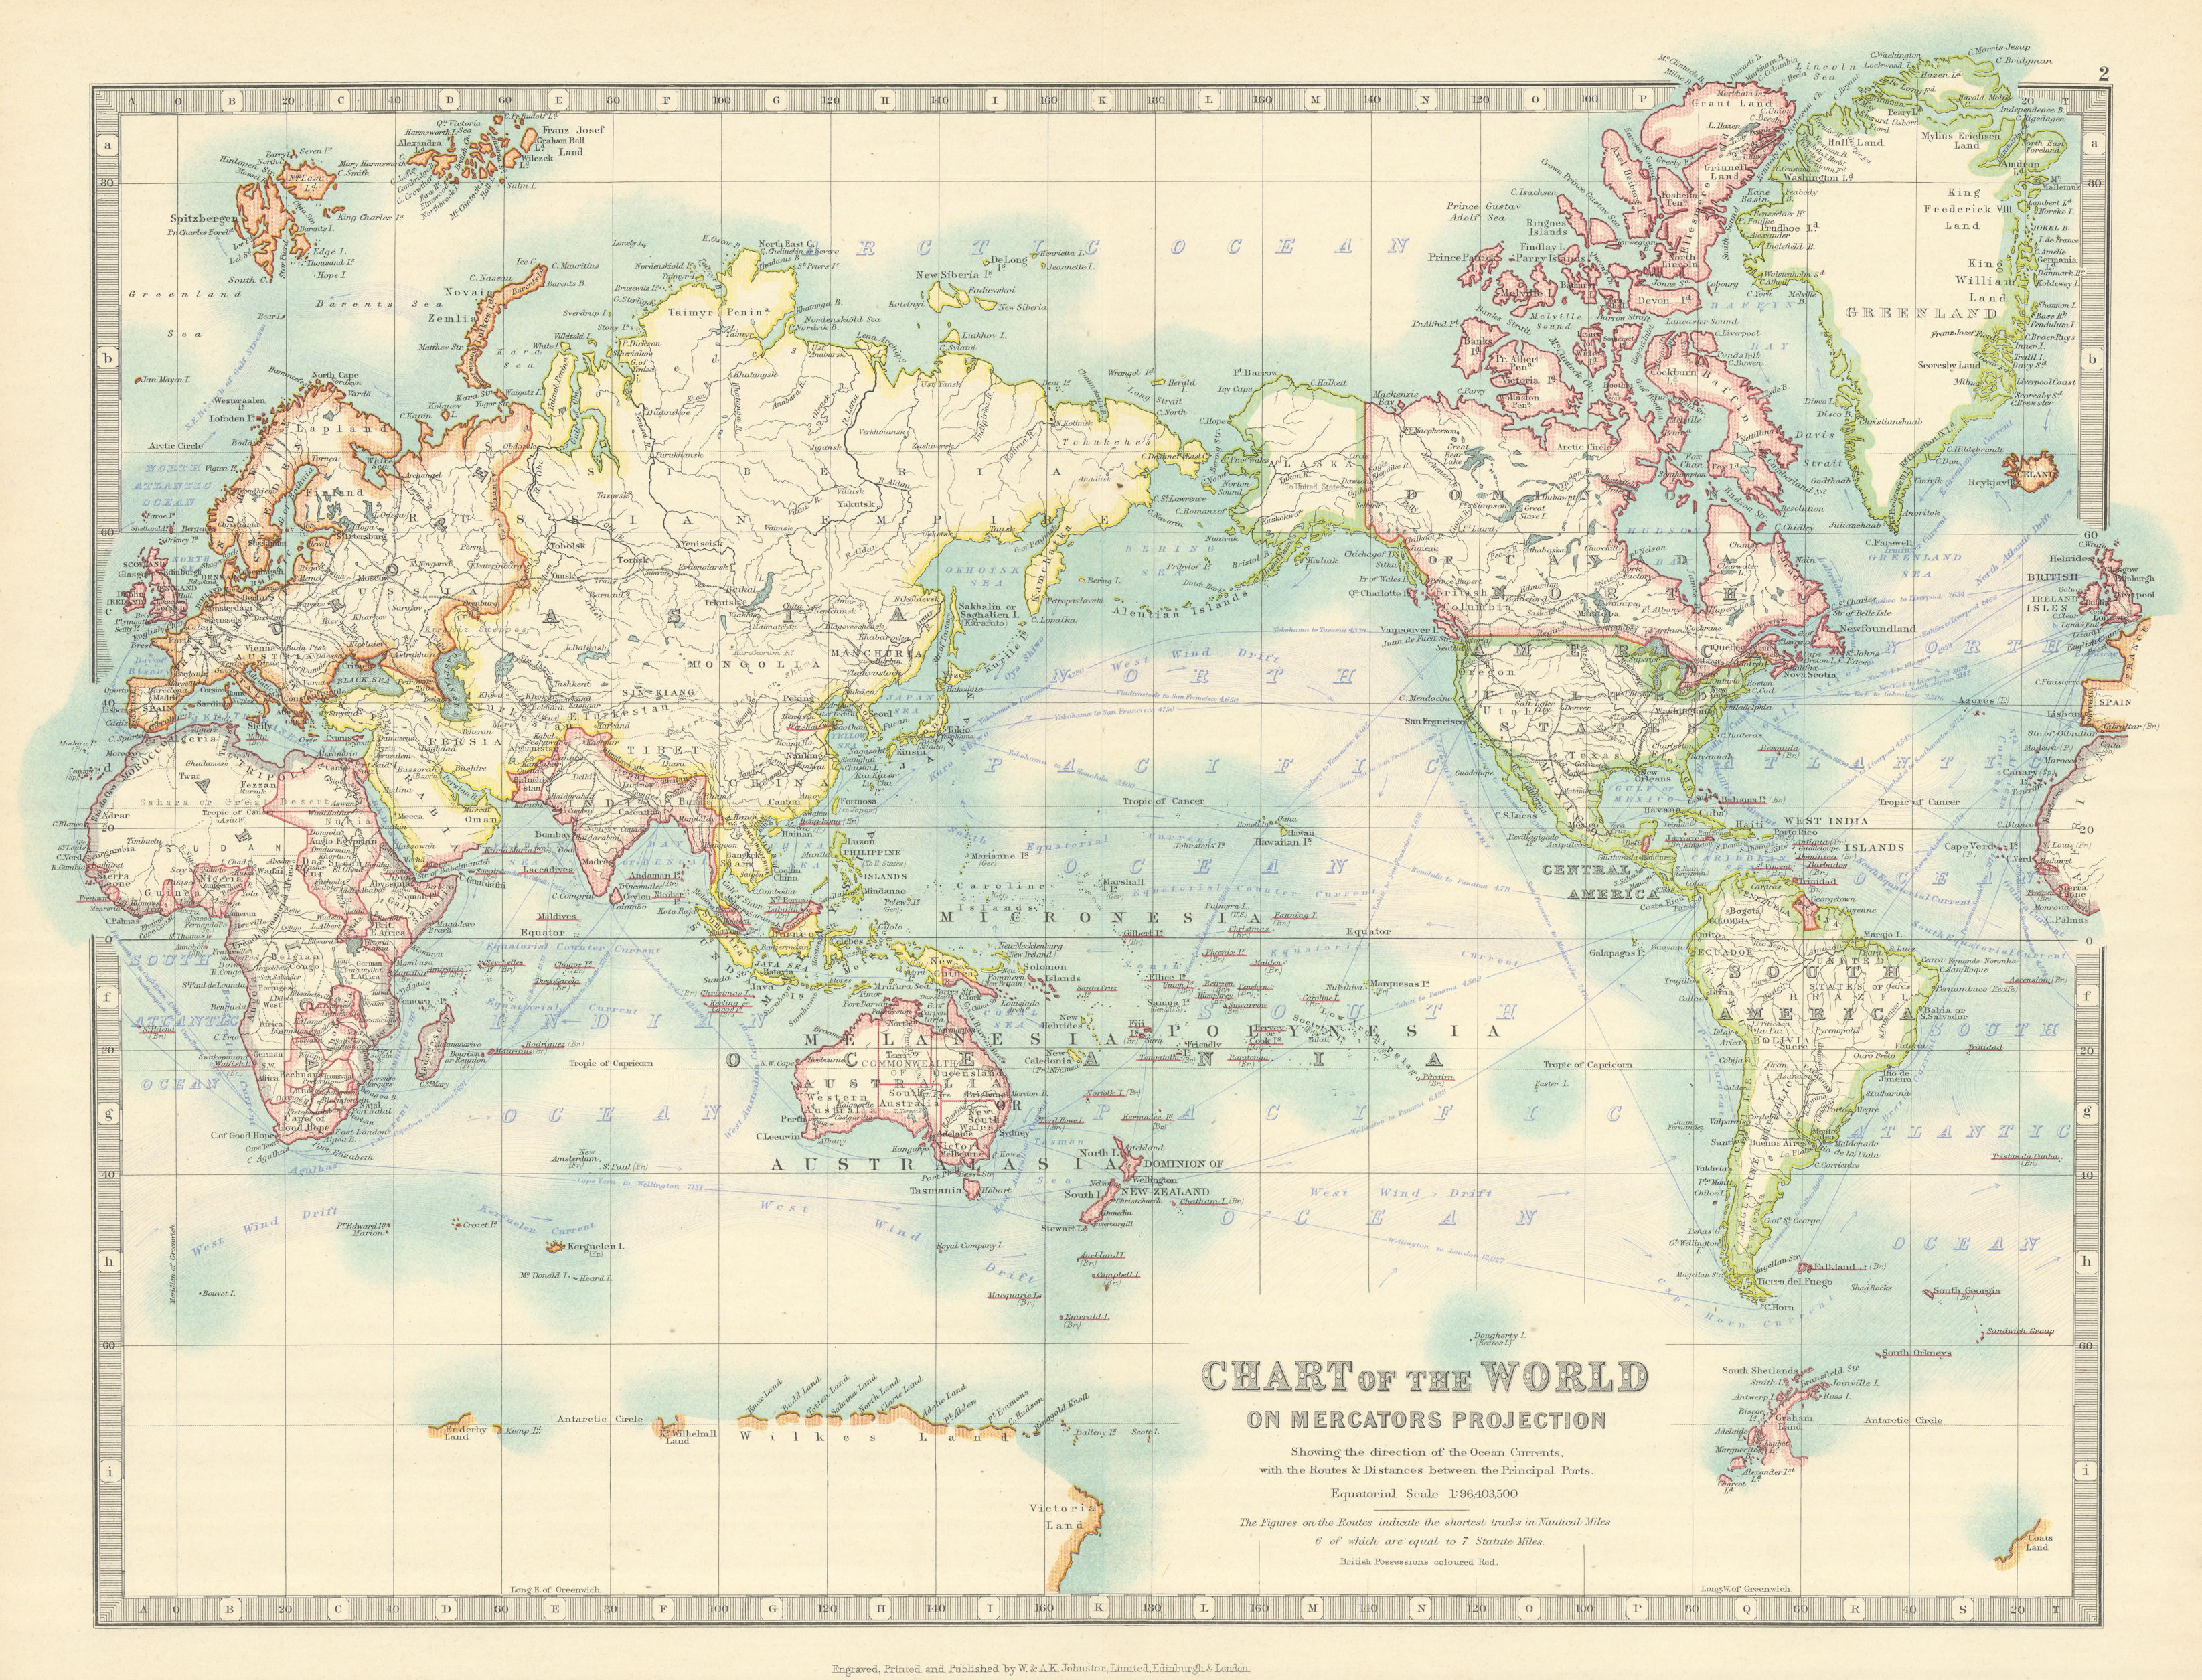 Associate Product WORLD ON MERCATOR'S PROJECTION unusually Pacific-centred. JOHNSTON 1913 map